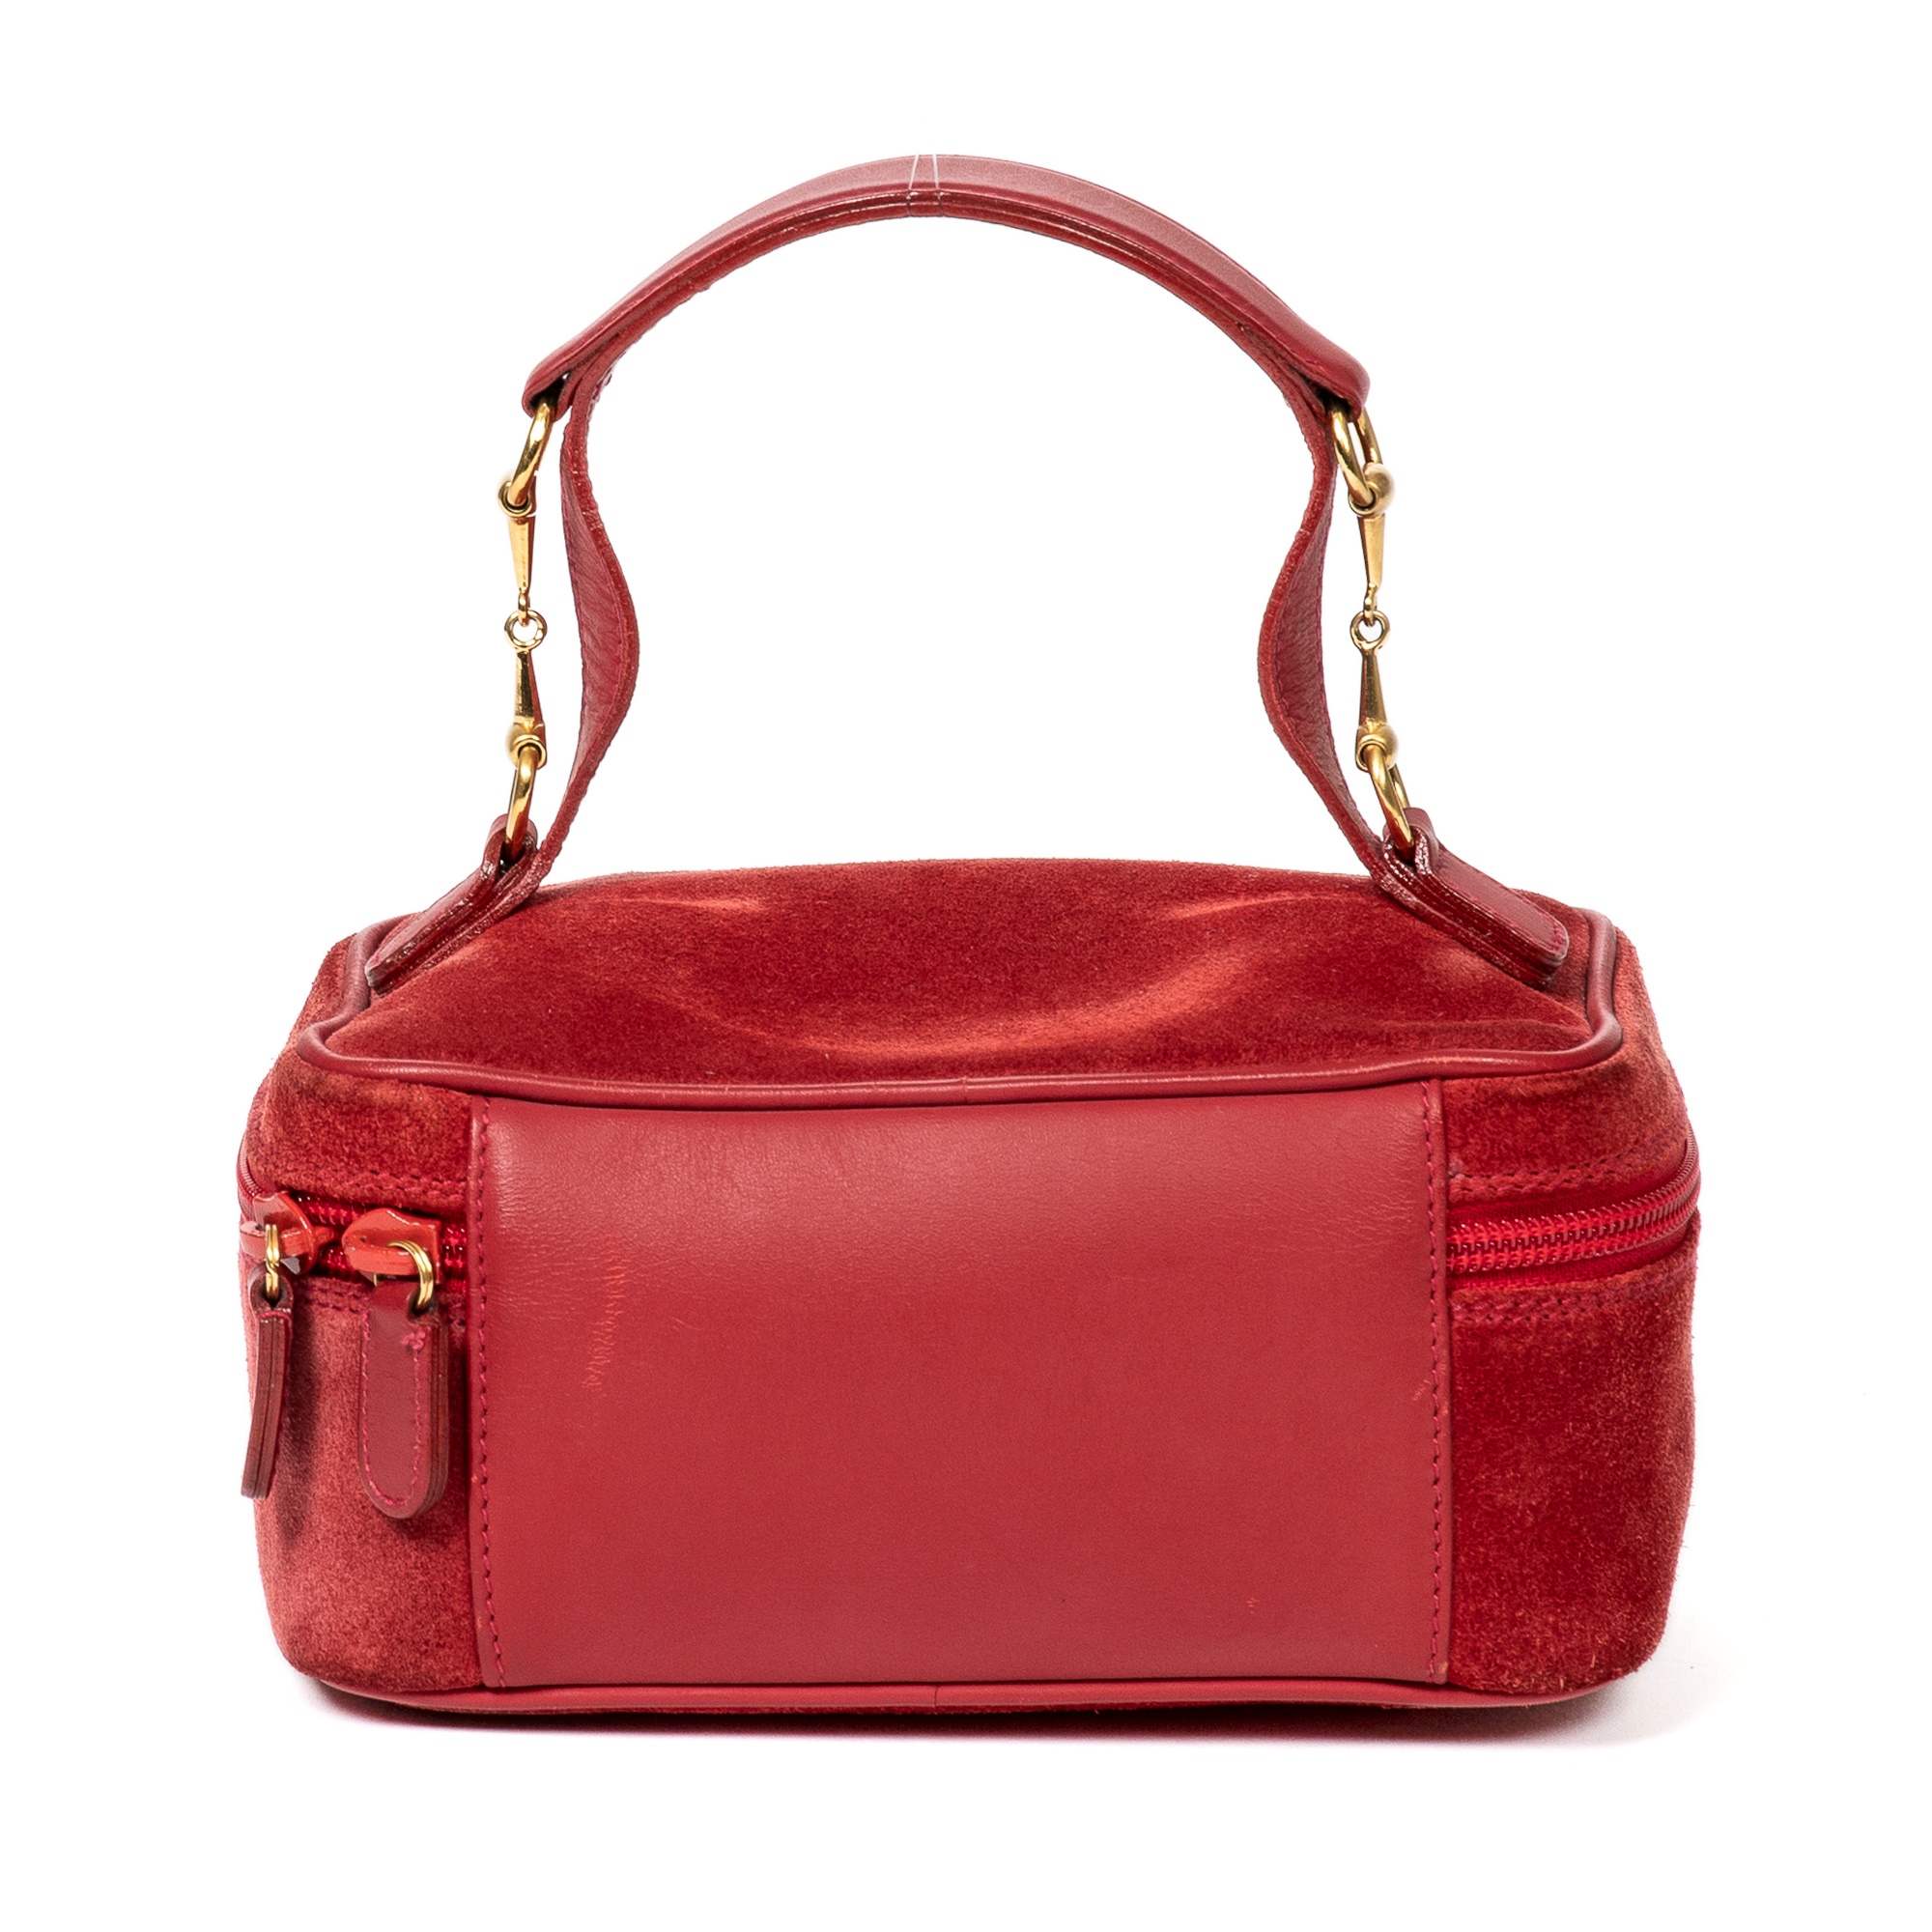 Gucci Red Suede Horsebit Cosmetic Case - Image 2 of 7